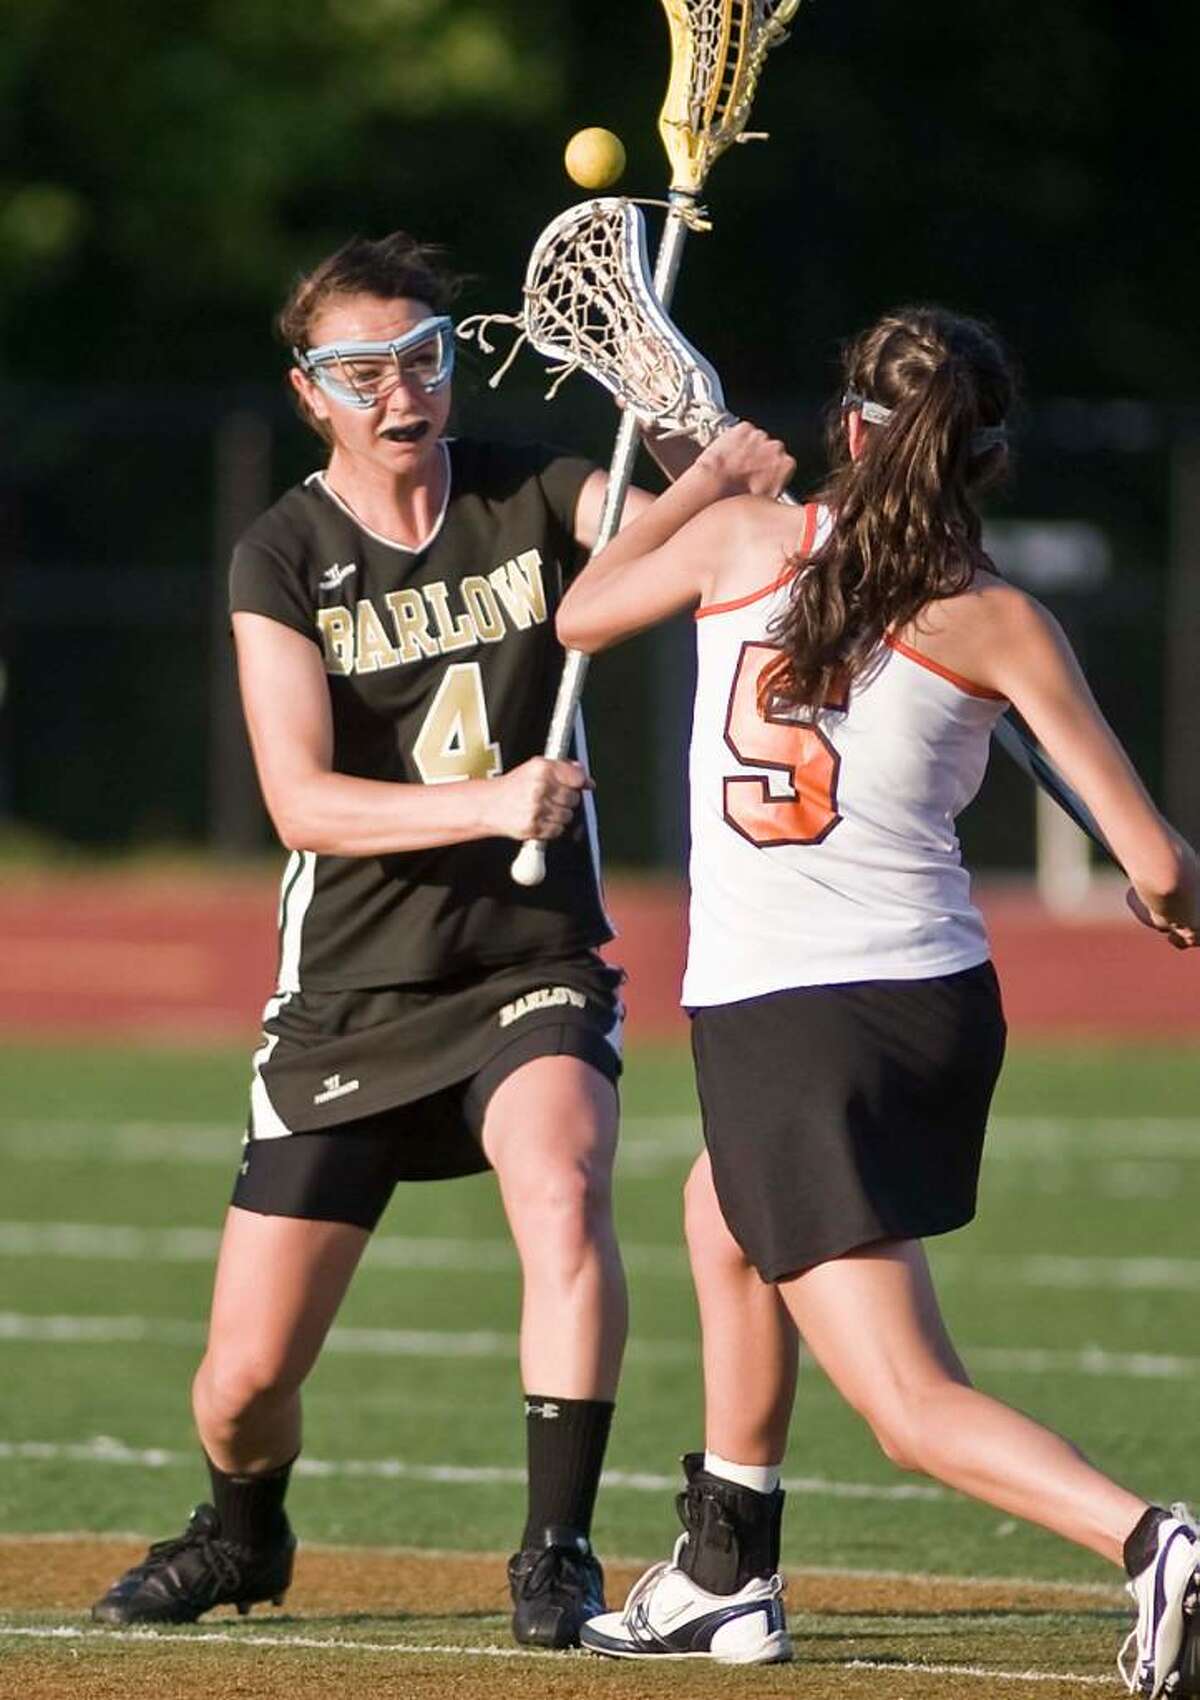 Balow's Libby Barlow tries to get the ball away from Ridgefield's Cara Anne Lockwood during a girls lacrosse game at Ridgefield. Friday, May 14, 2010